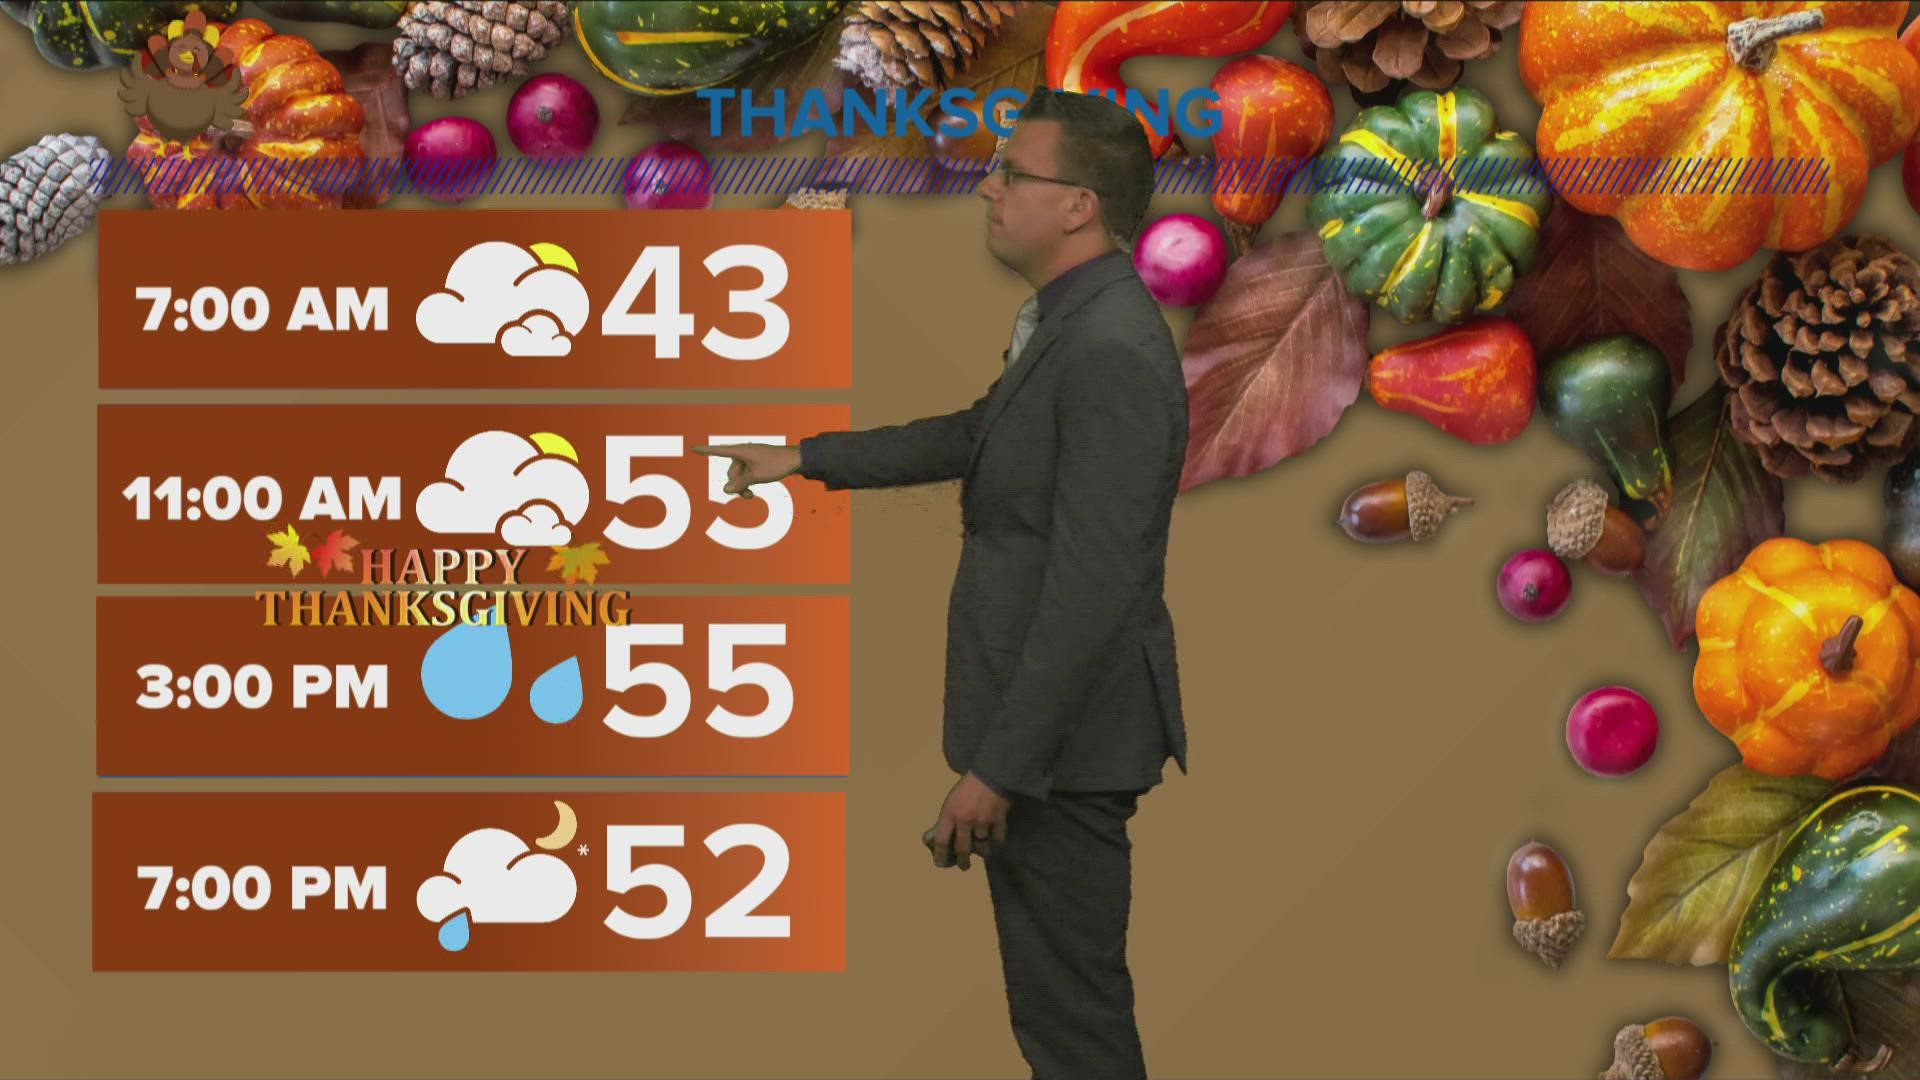 Rain is in the forecast for your Thanksgiving, as is a cold Black Friday.